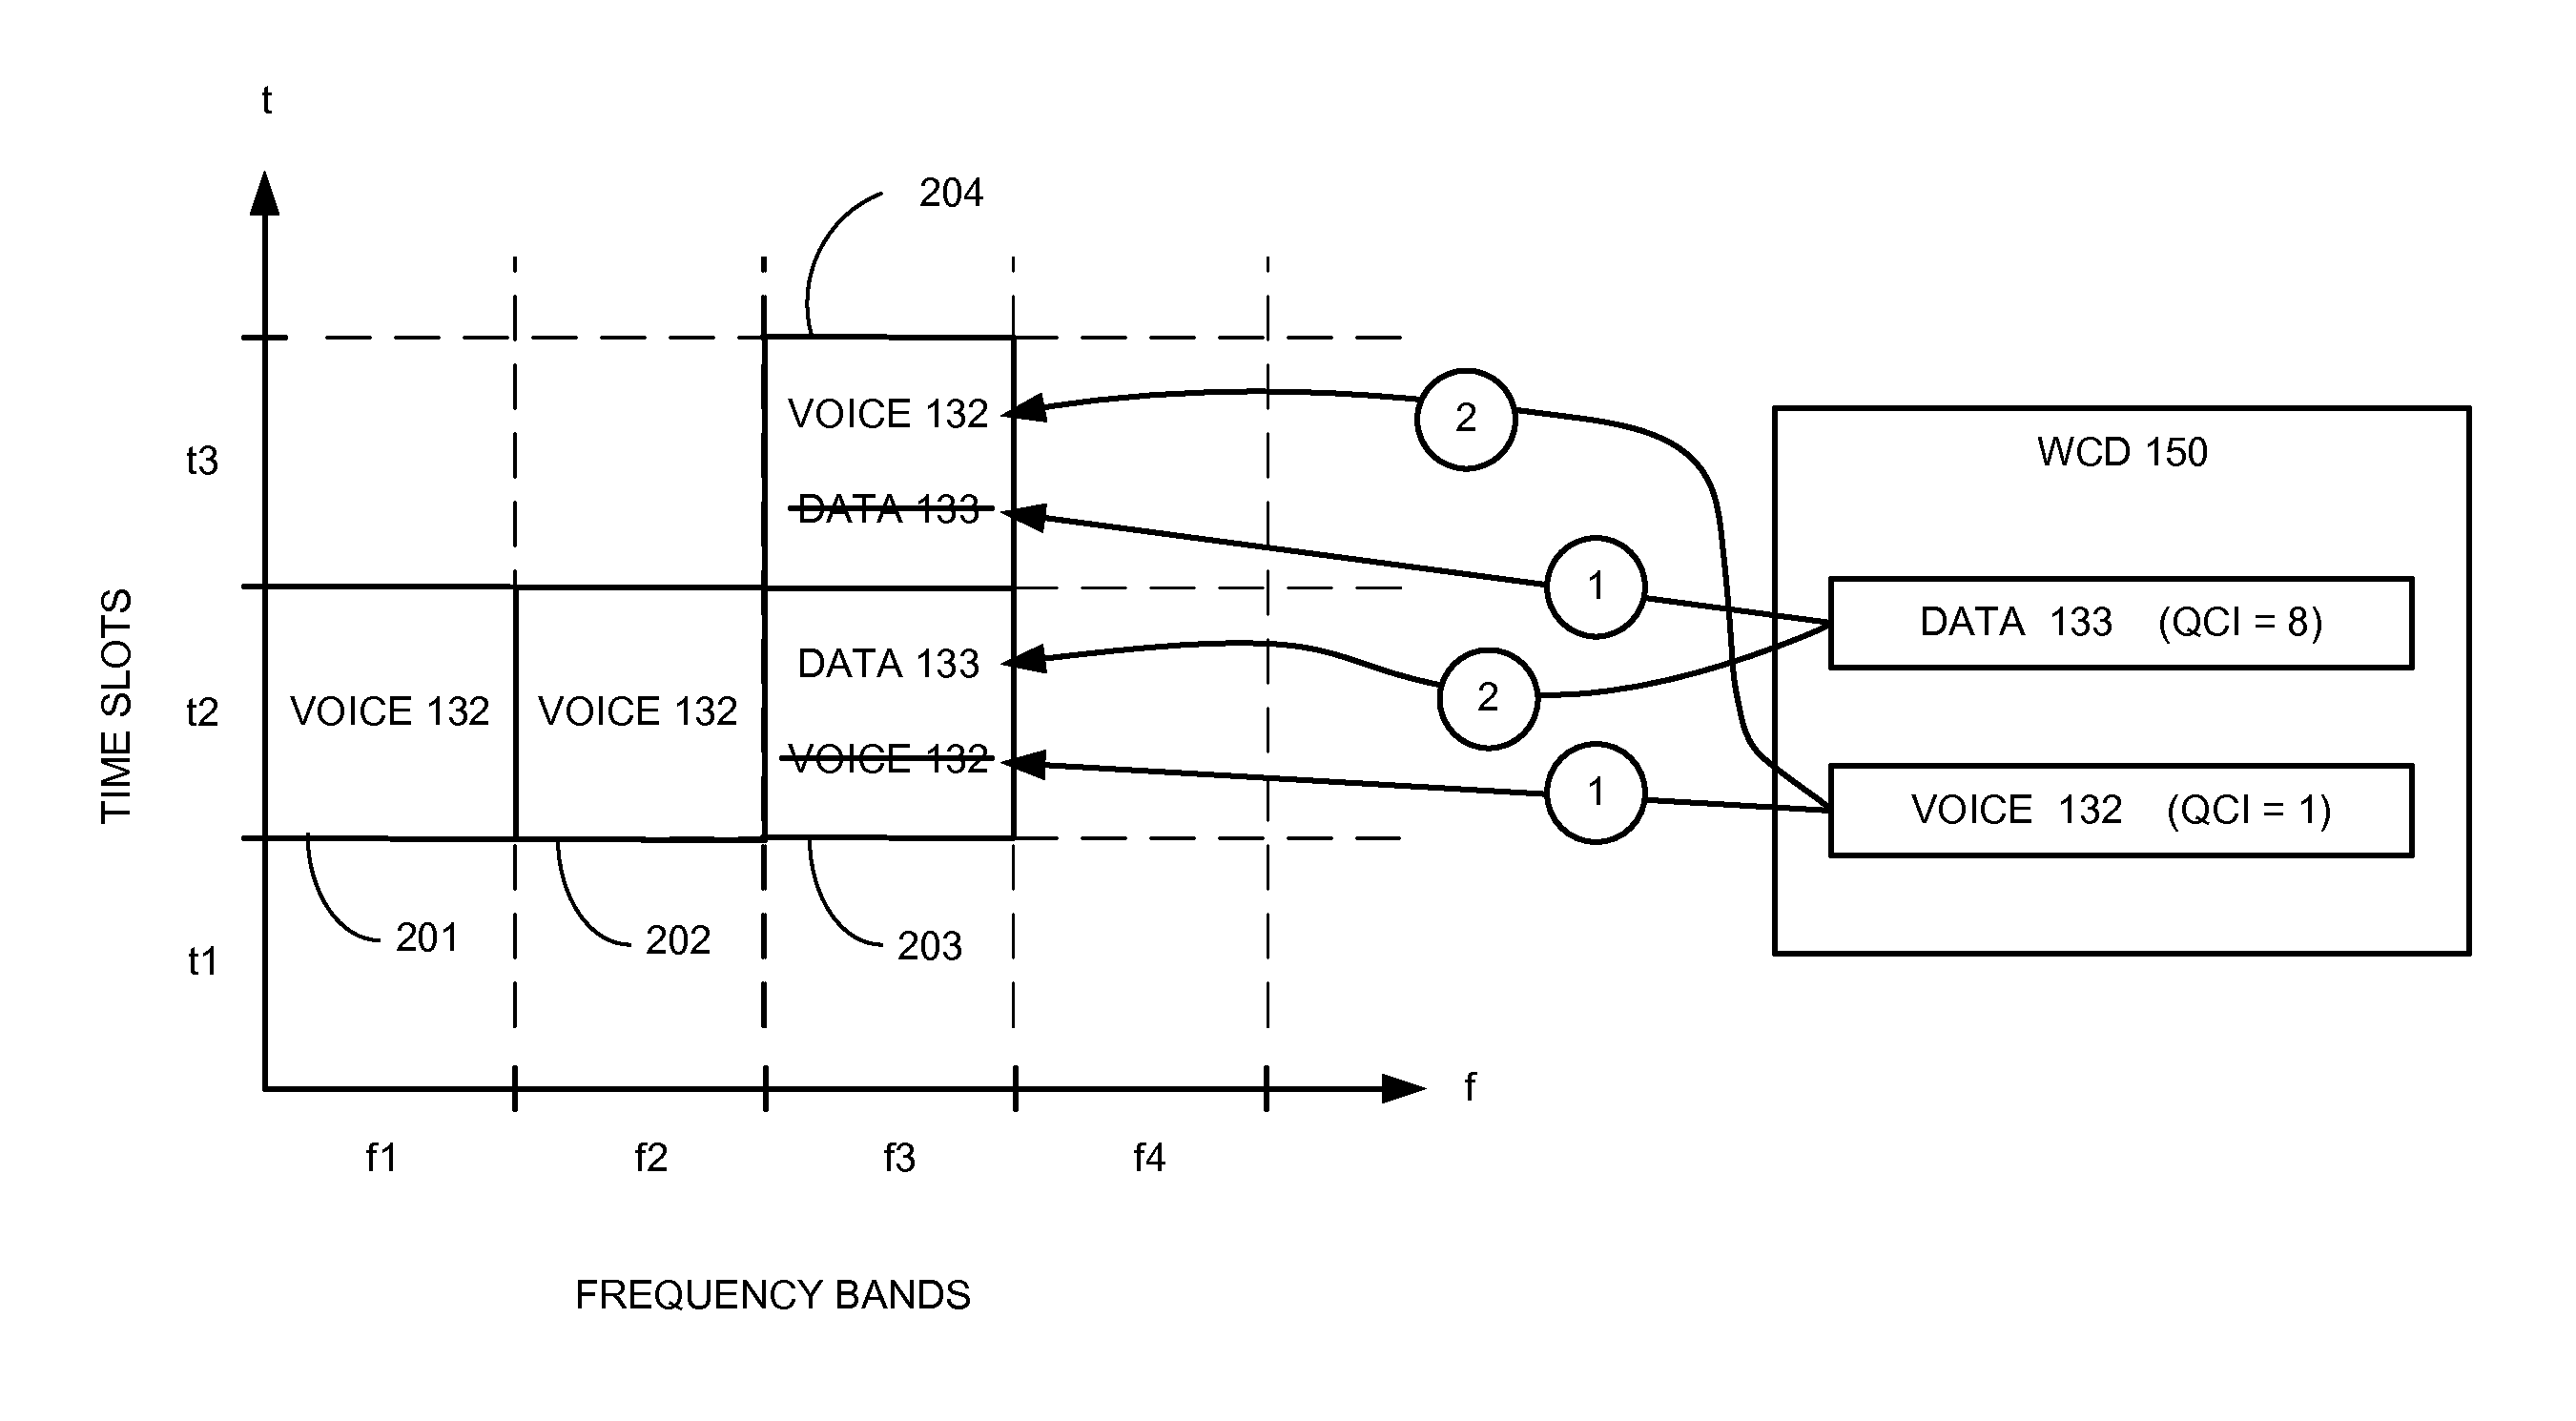 Orthogonal frequency division multiplexing (OFDM) communication system and method to schedule transfers of first and second user communications